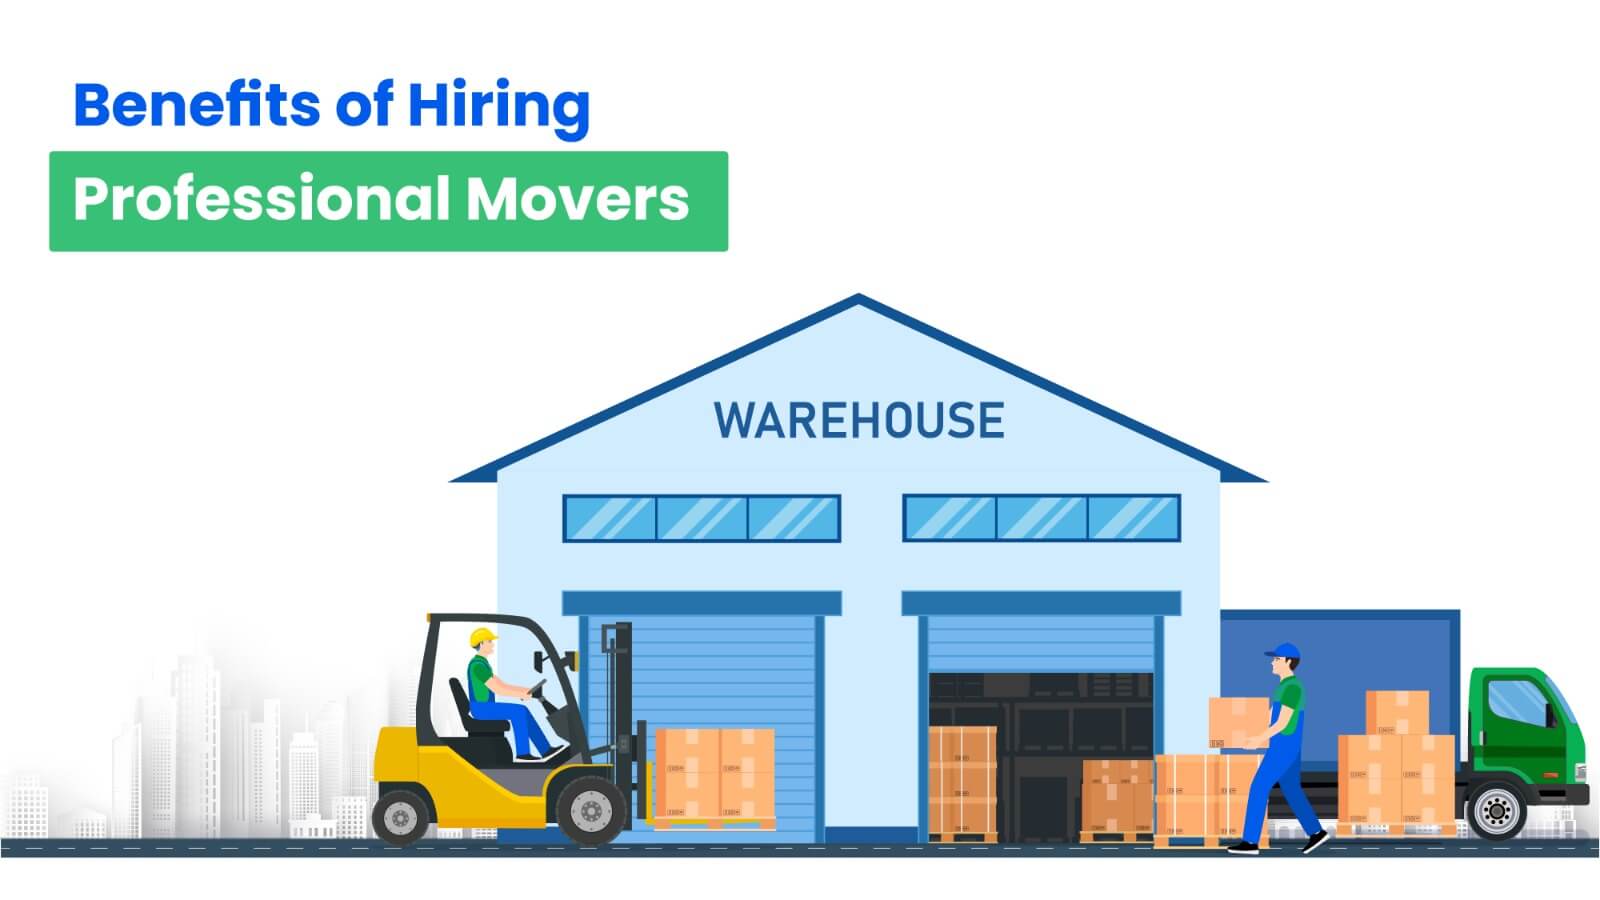 Benefits of hiring professional movers